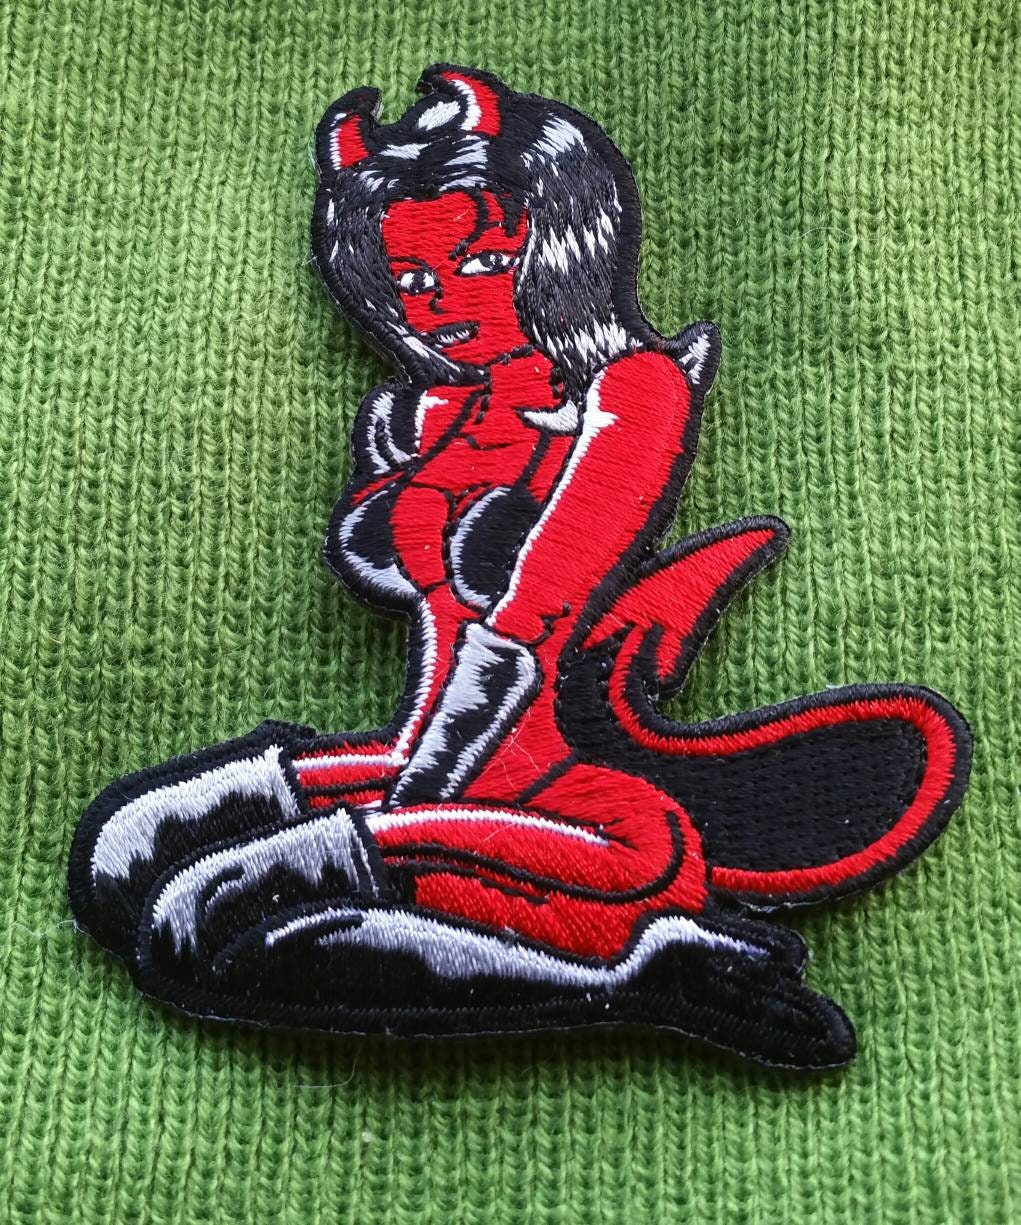 Sexy Succubus Devil Babe Embroidered Biker Patch – Quality Biker Patches